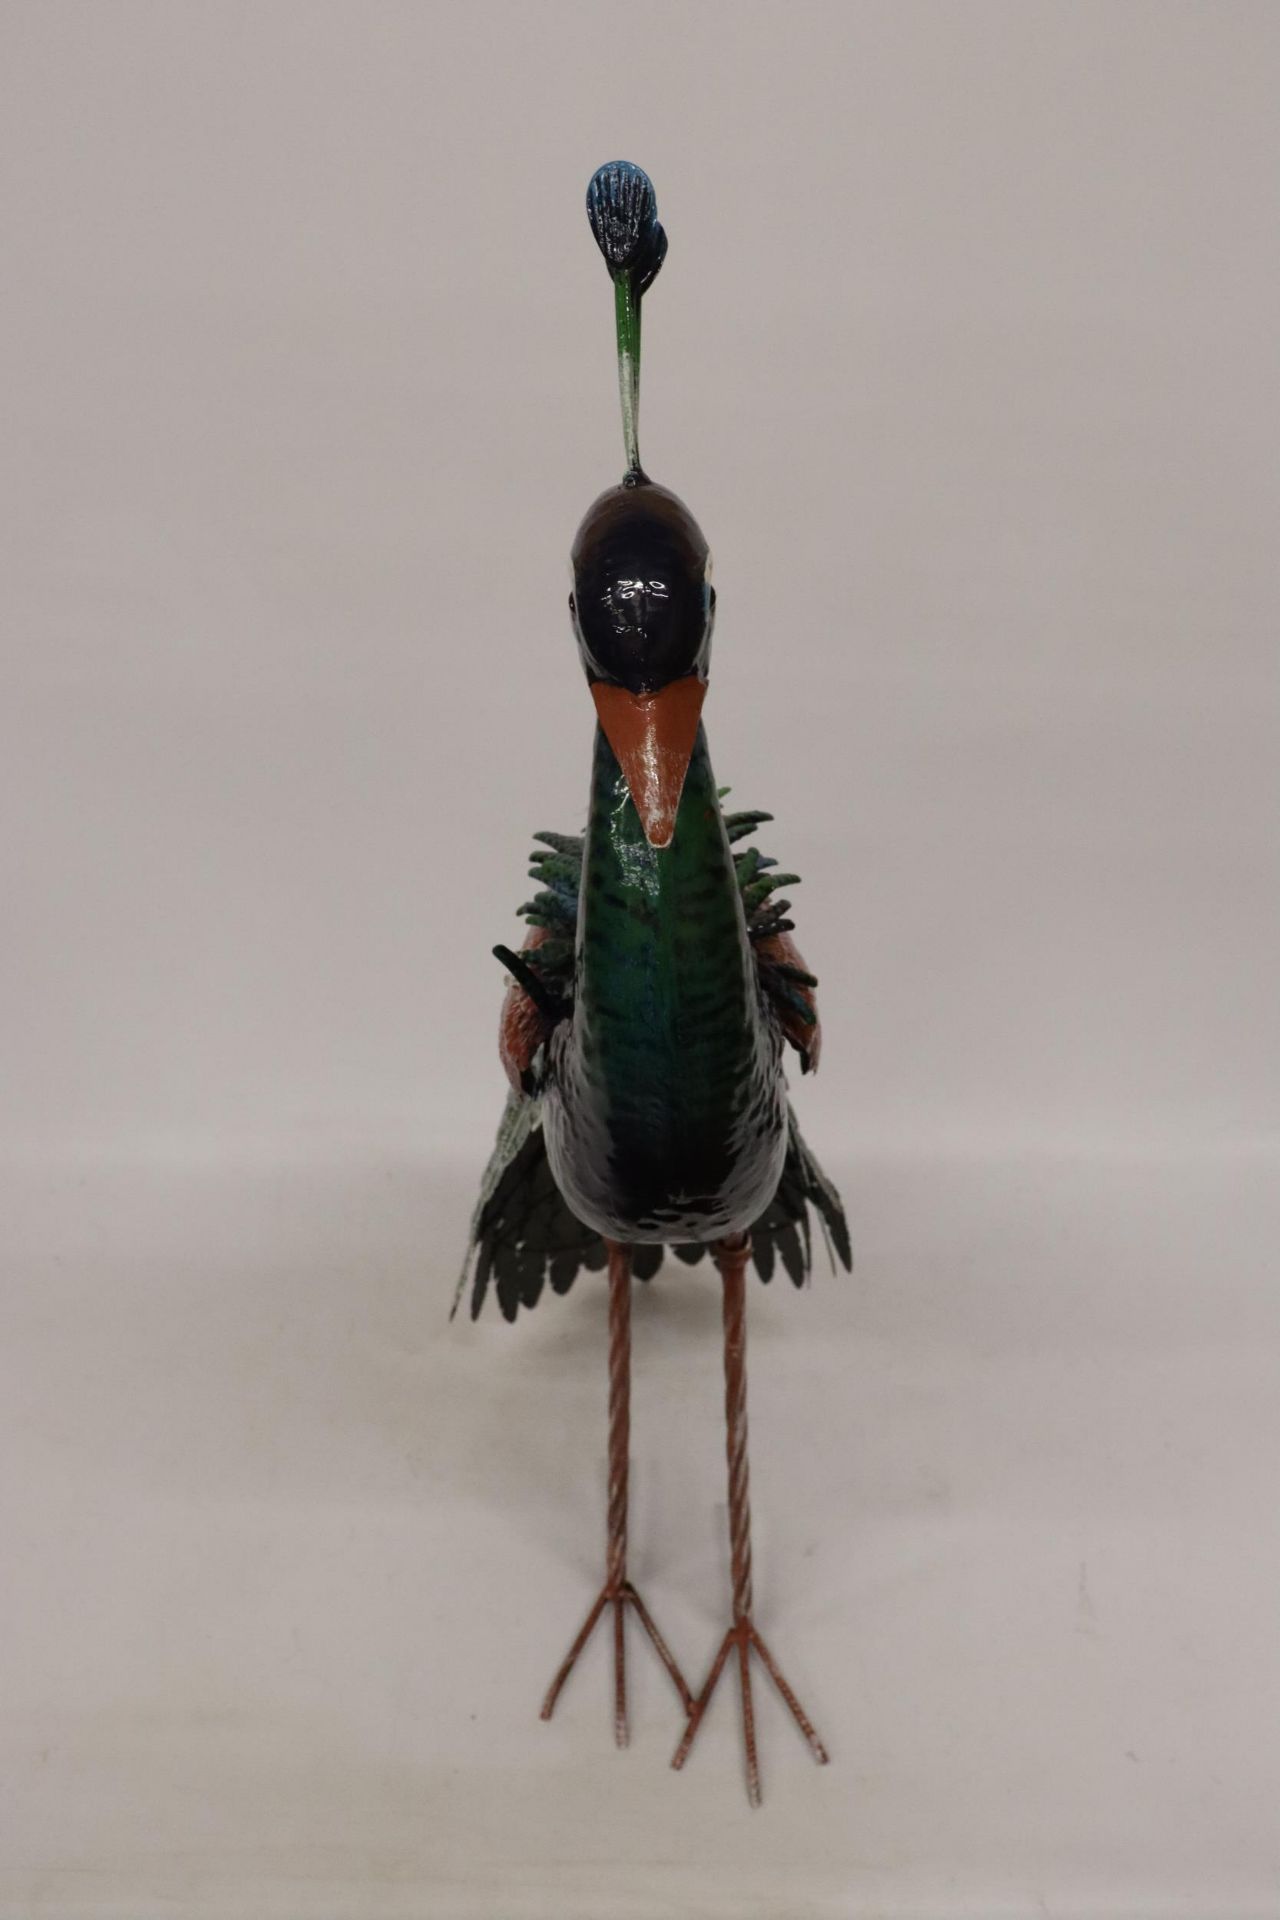 A HEAVY METAL PAINTED PEACOCK GARDEN ORNAMENT, 1 METRE HIGH - Image 3 of 8